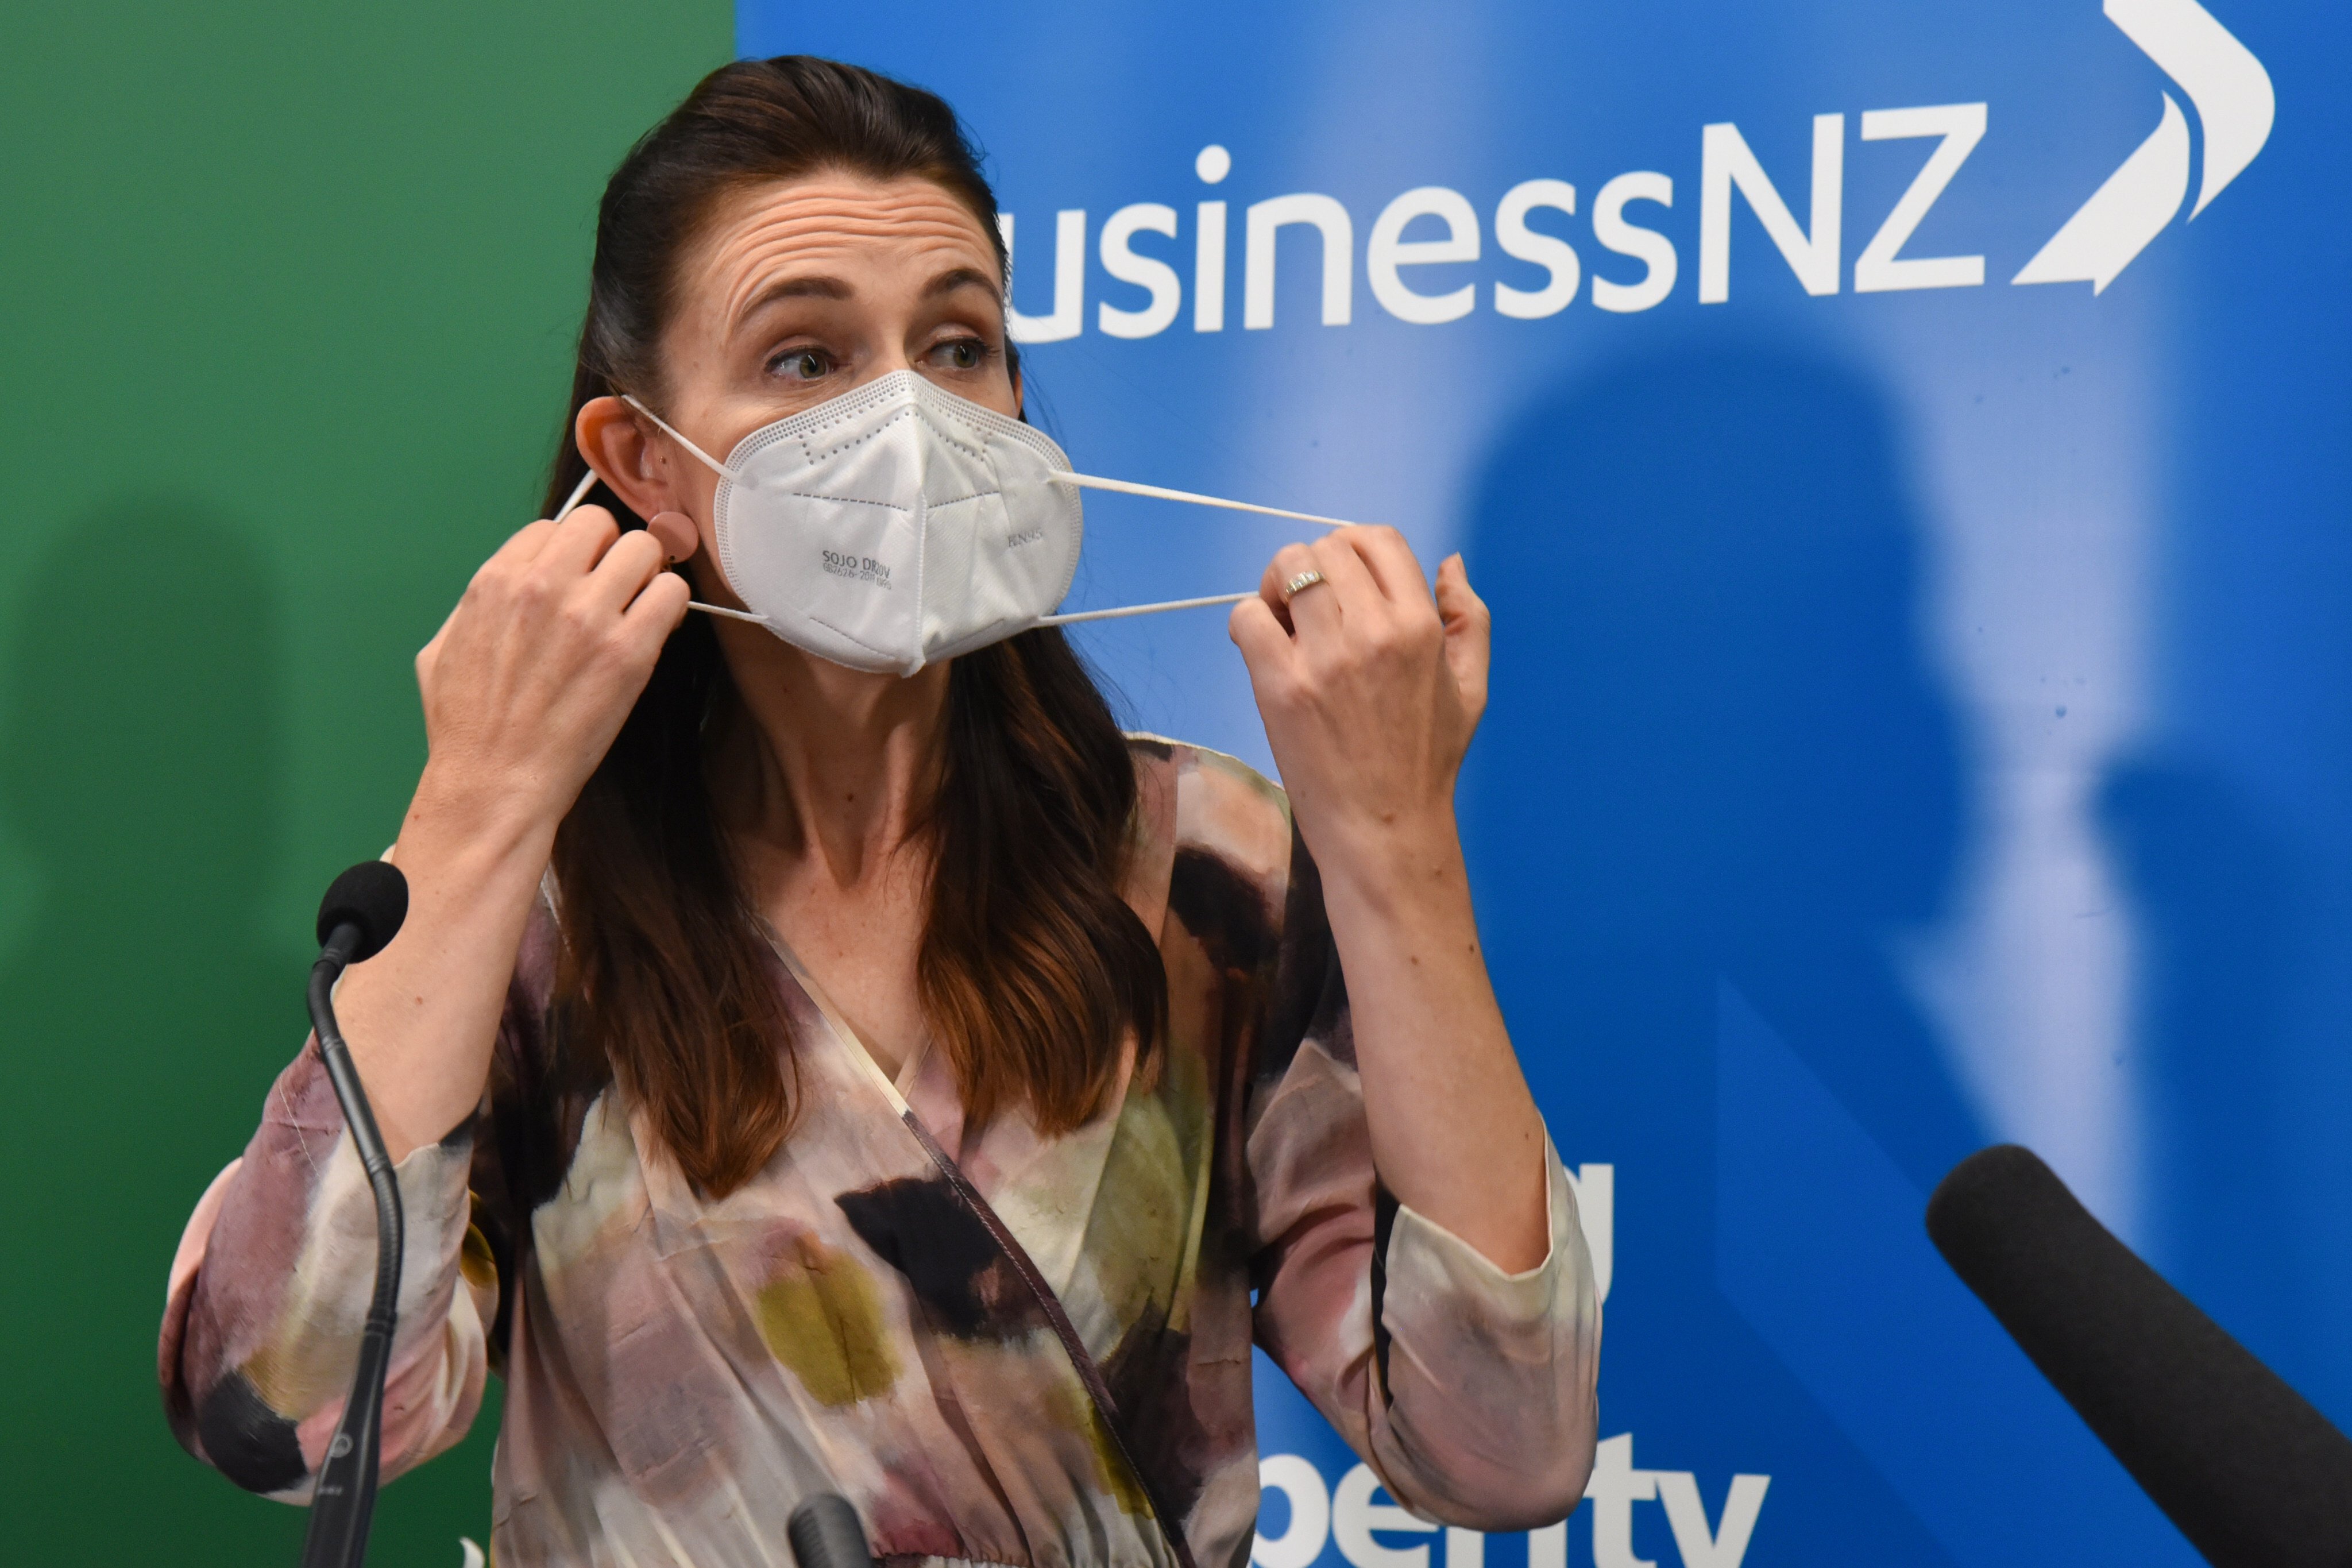 New Zealand Prime Minister Ardern at a press conference in Auckland. Photo: dpa